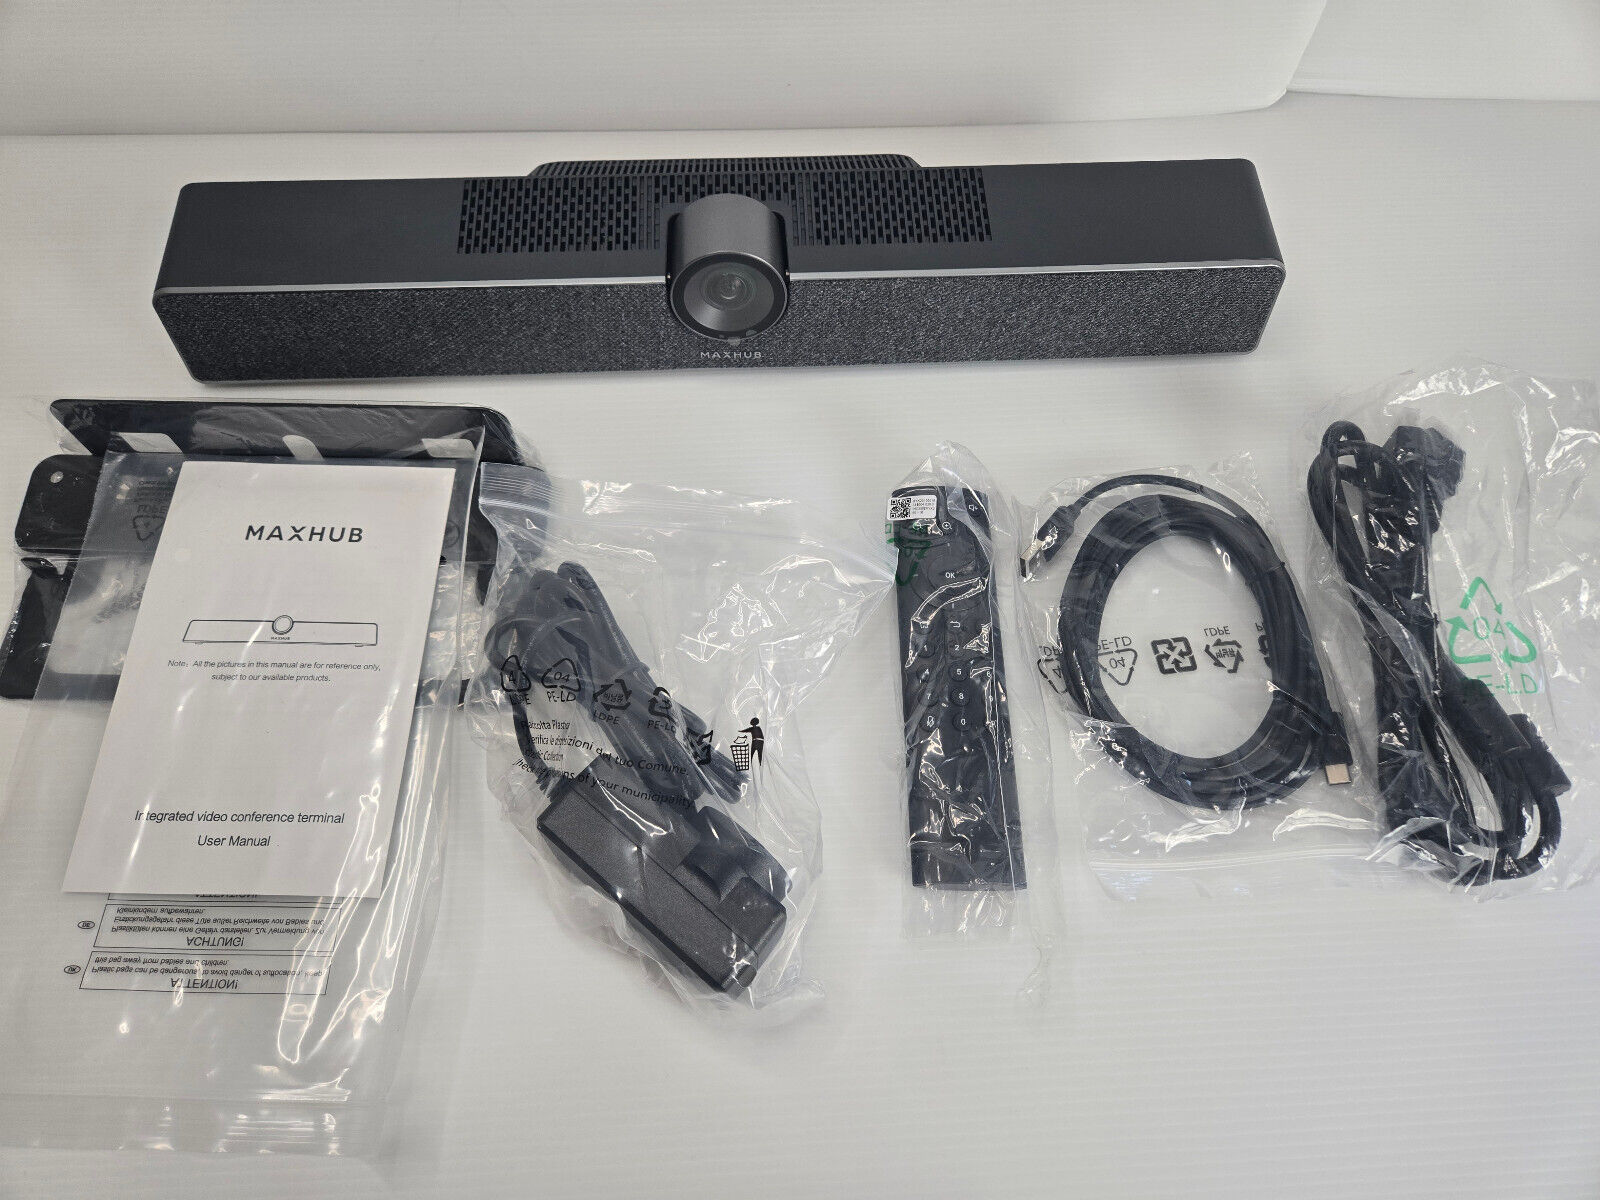 Enther & MAXHUB 4K Conference Camera, All-in-one Conference Room Camera System